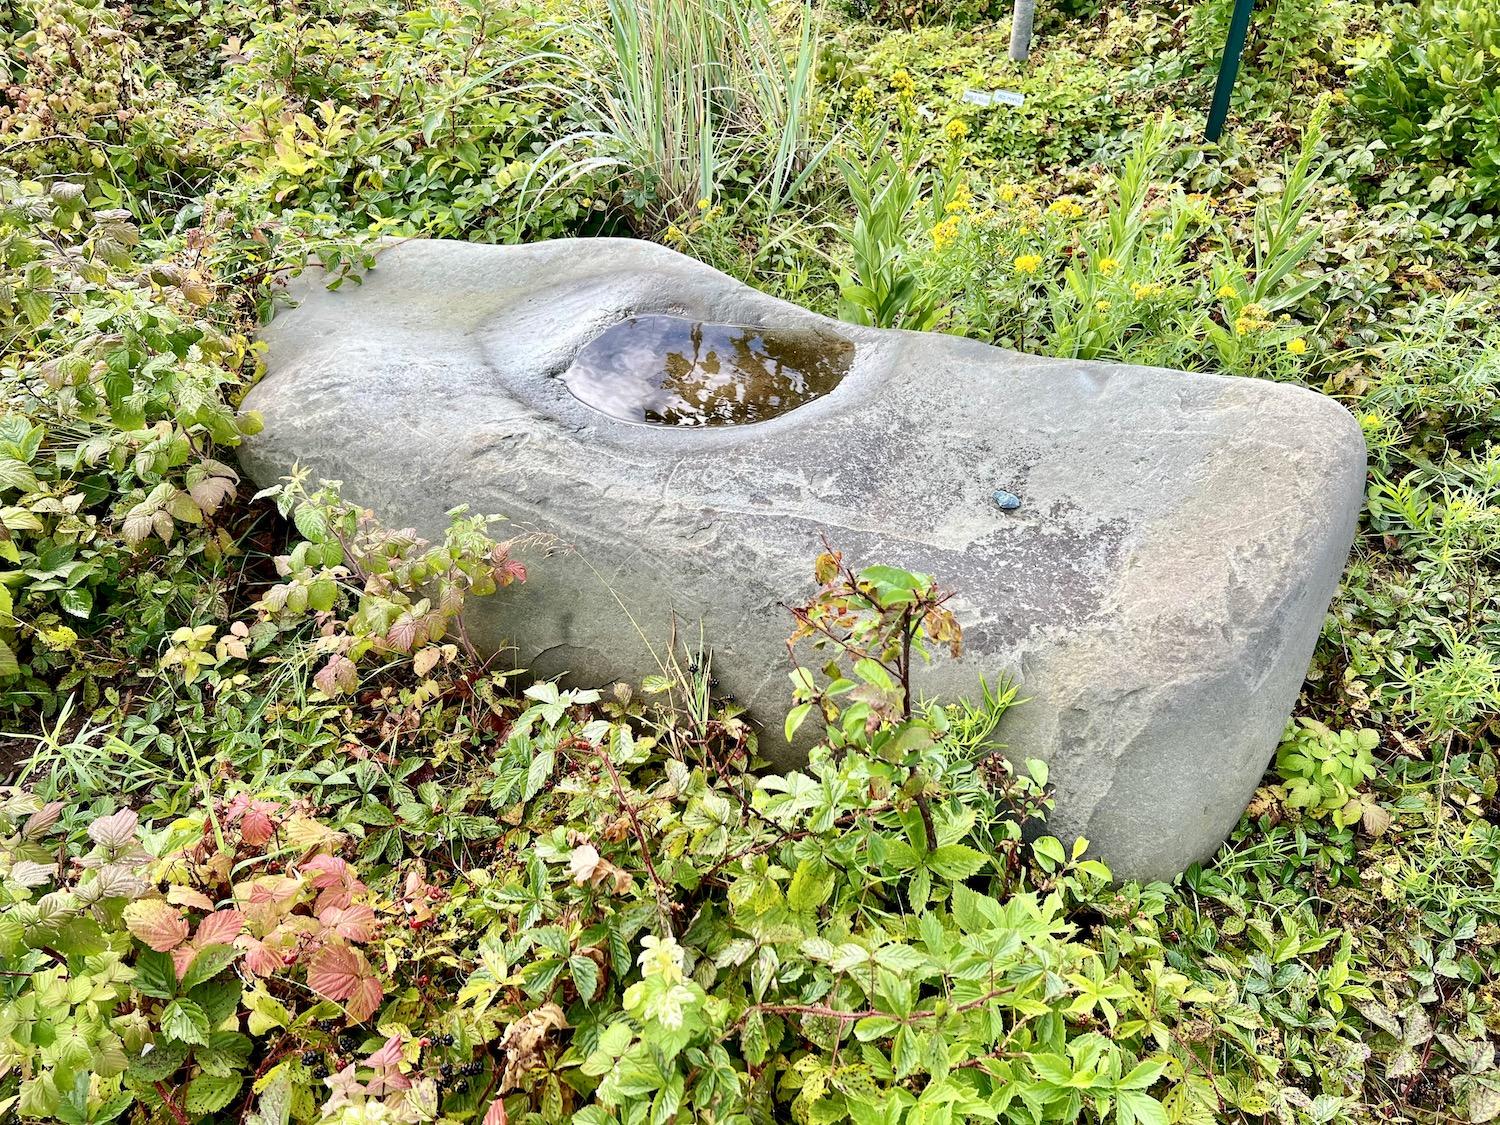 This rock has a natural indent that serves as a water feature.